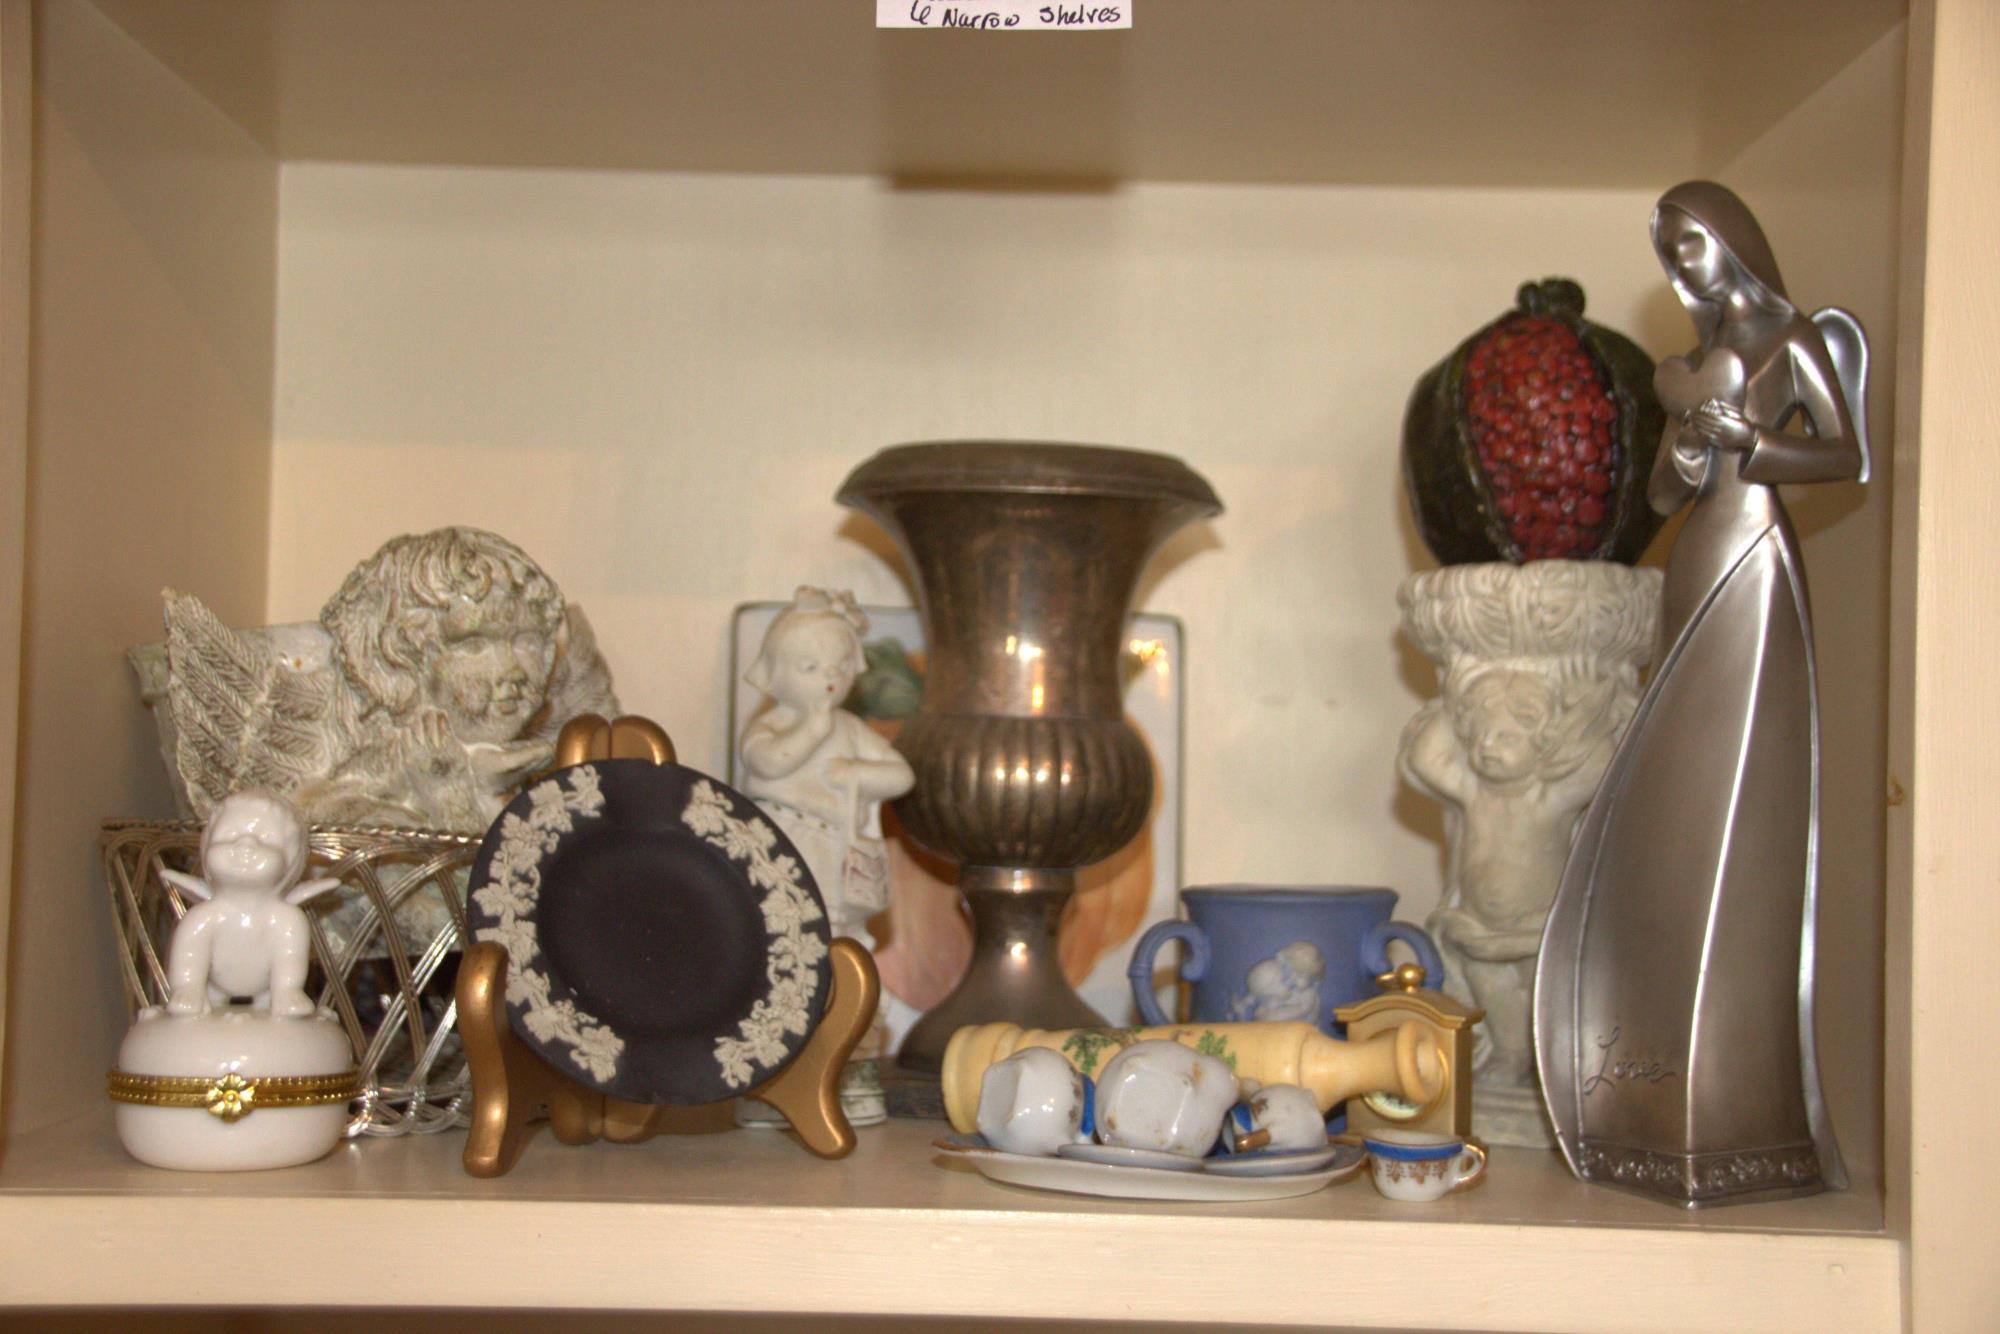 CONTENTS OF 6 SHELVES OF DECORATIVES